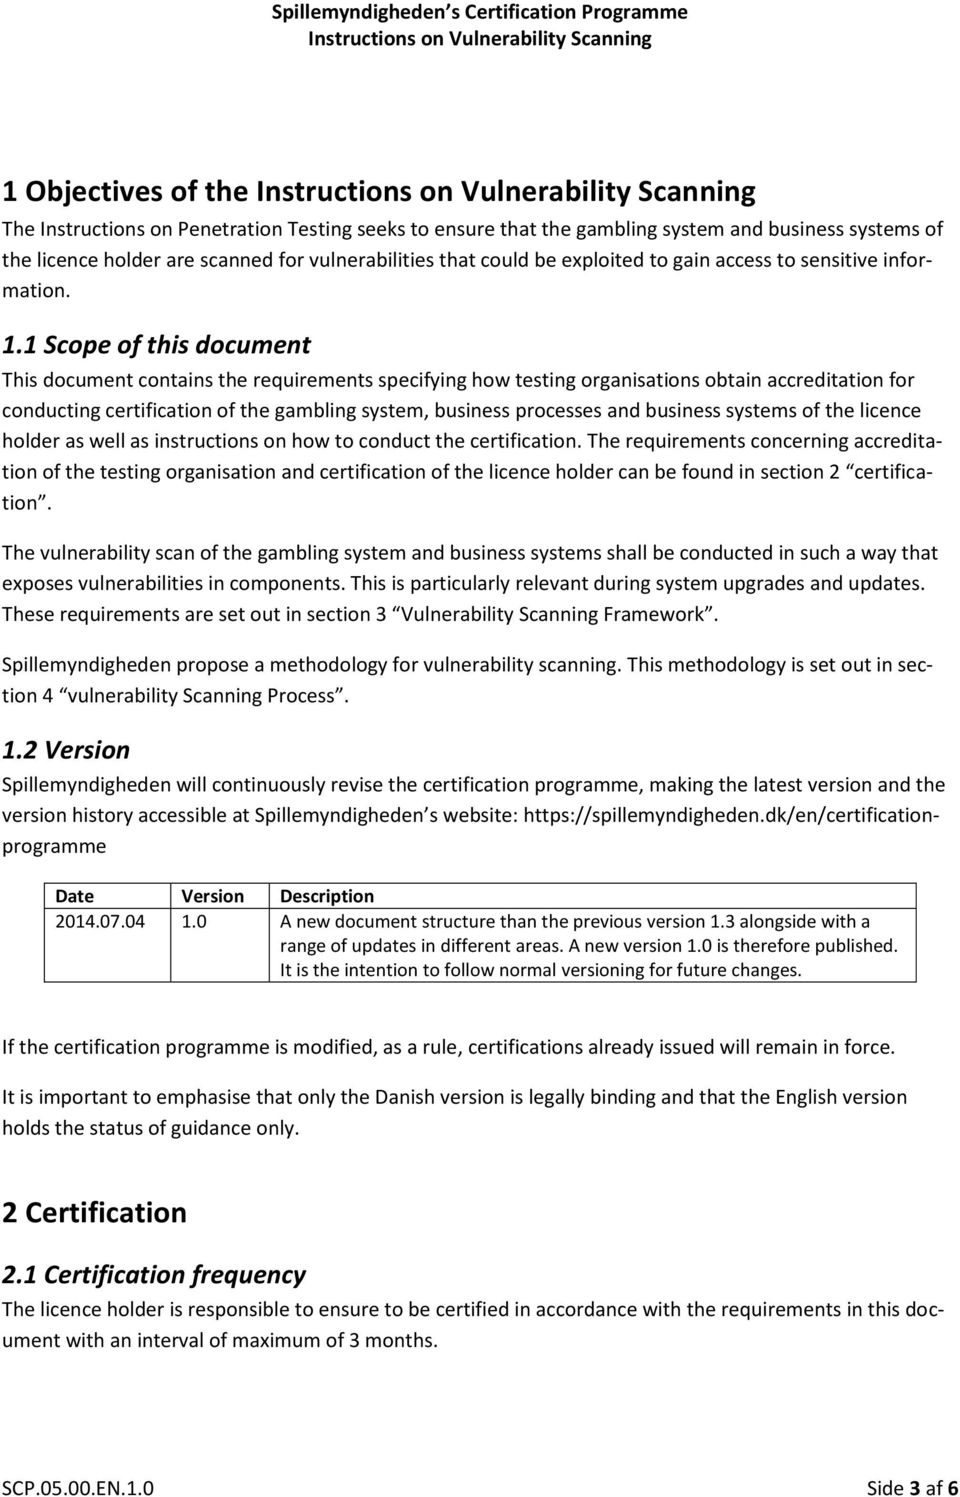 1 Scope of this document This document contains the requirements specifying how testing organisations obtain accreditation for conducting certification of the gambling system, business processes and